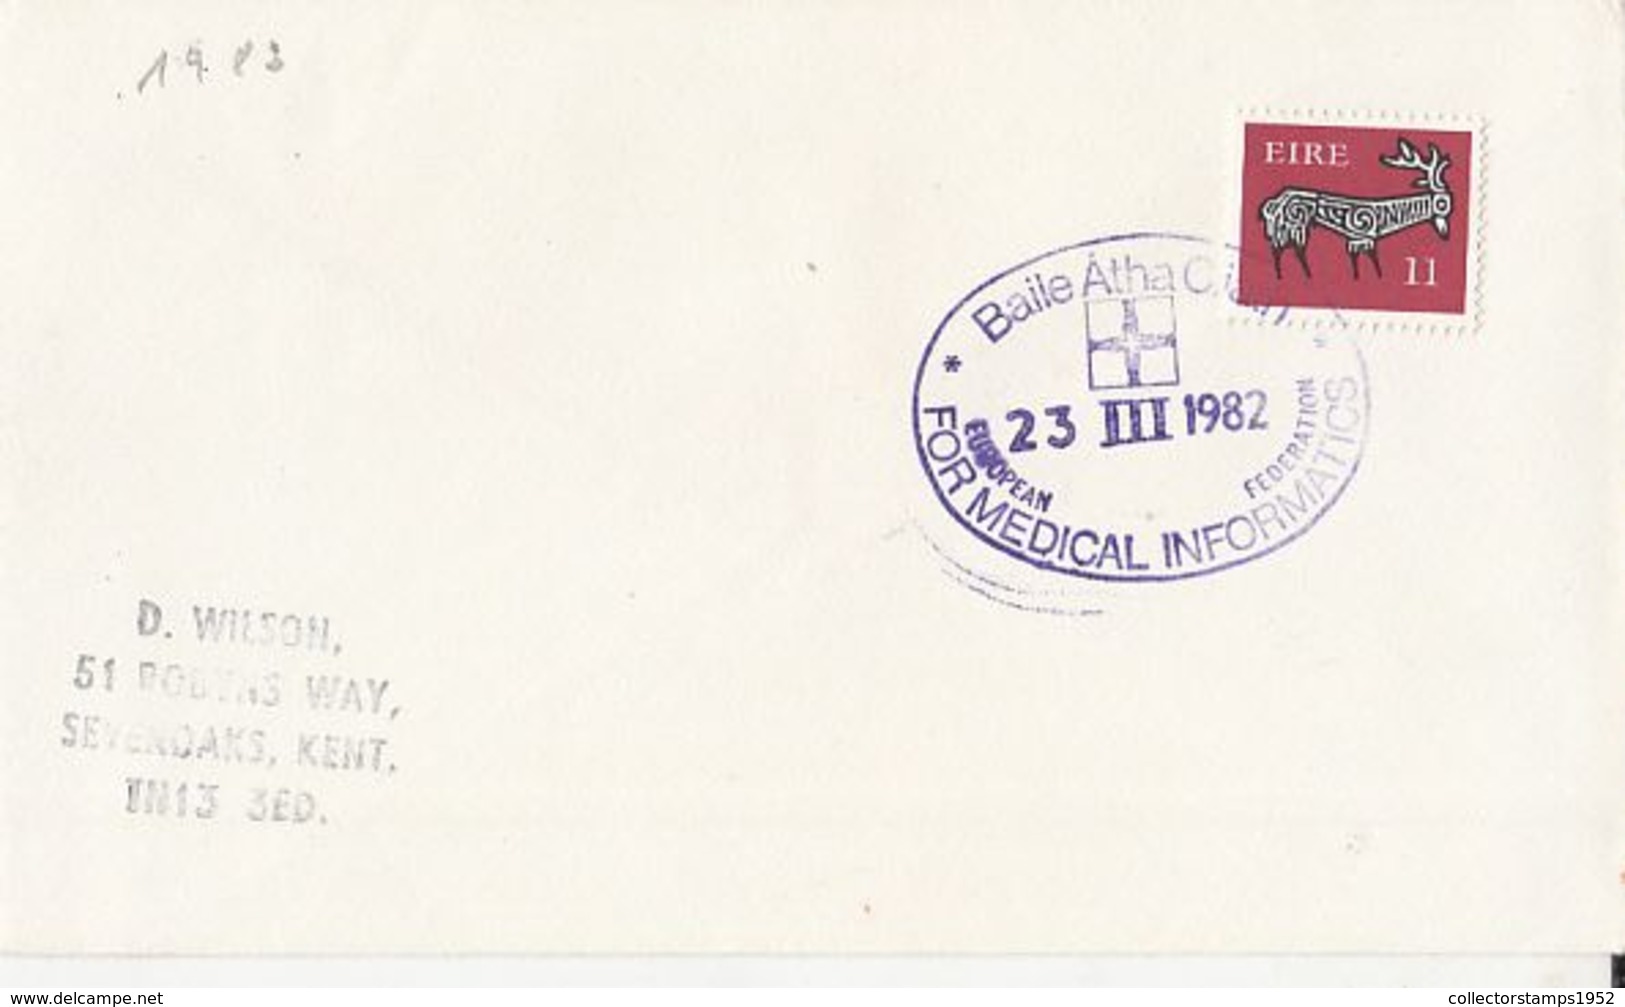 83577- BAILE ATHA CLIATH MEDICAL INFORMATICS SPECIAL POSTMARK ON COVER, DEER STAMP, 1982, IRELAND - Covers & Documents